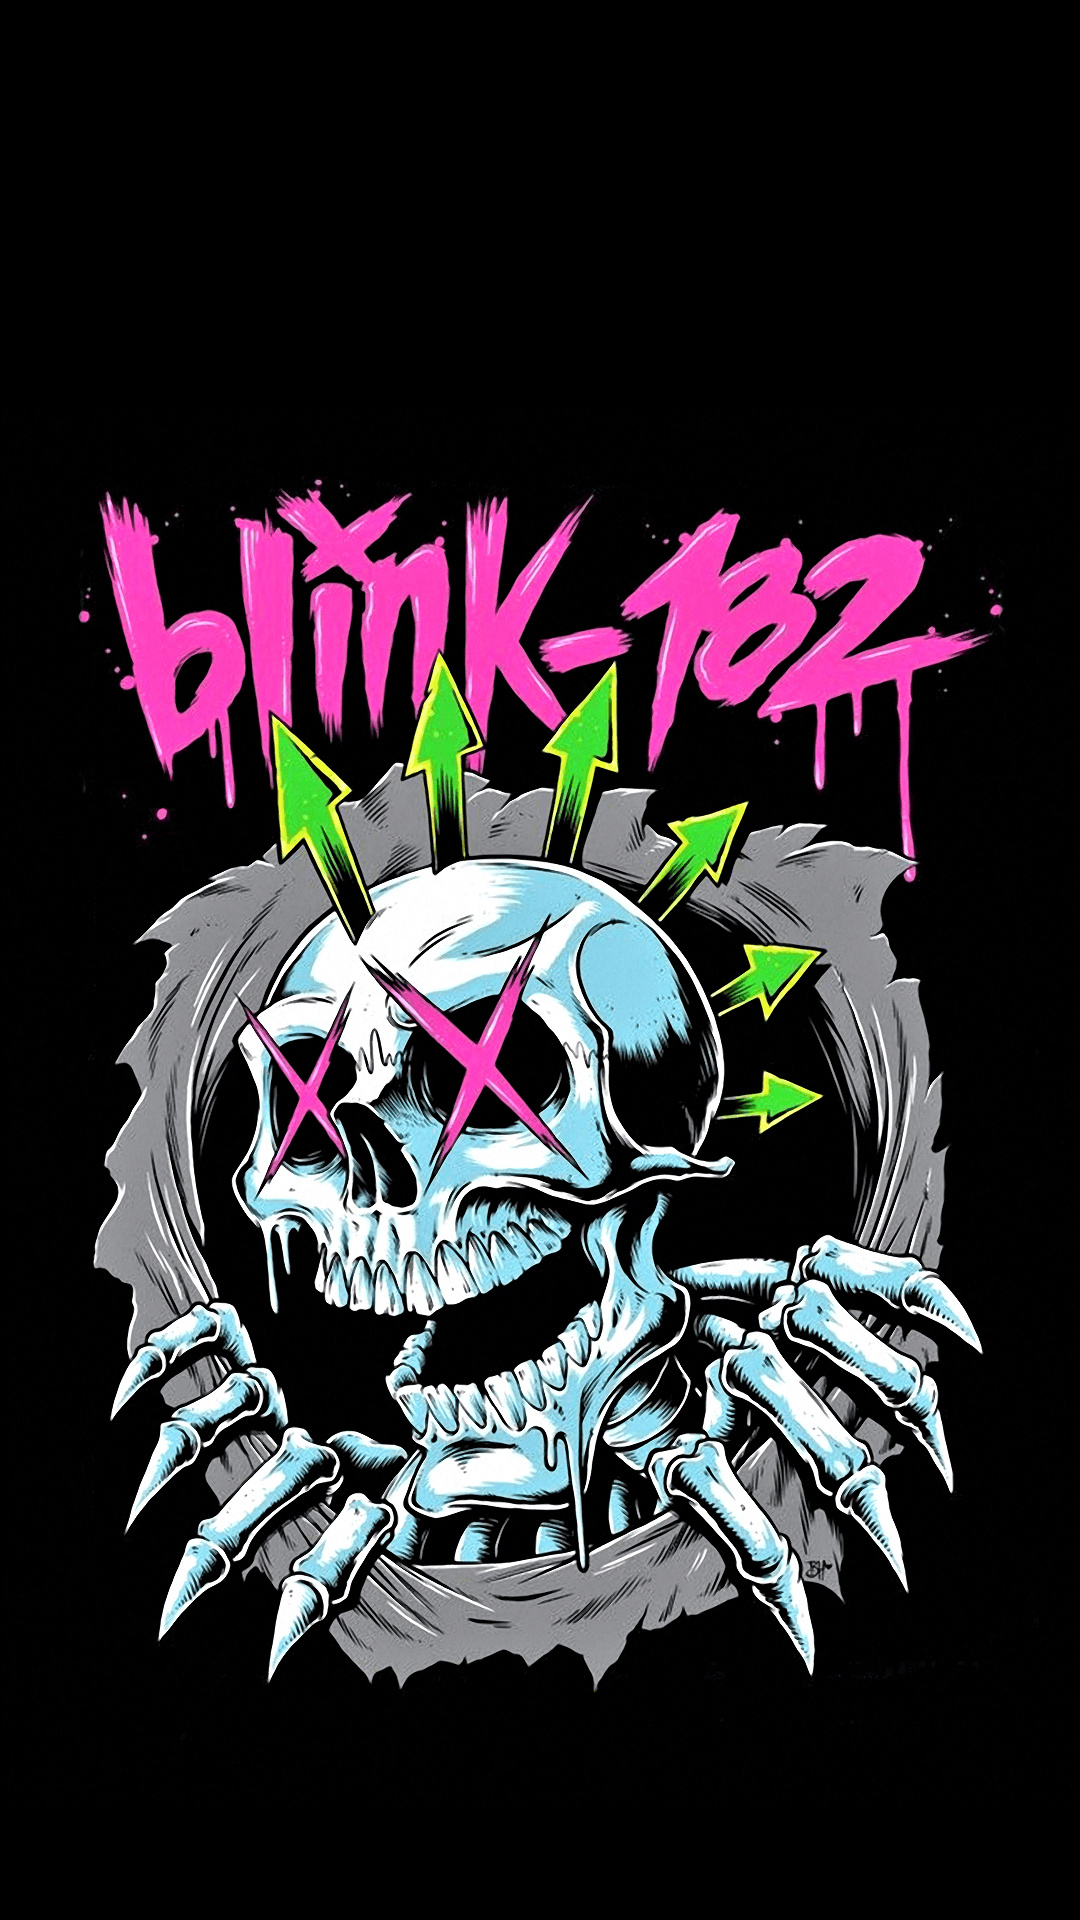 Blink-182, Energetic performances, Pop punk icons, iPhone wallpapers, 1080x1920 Full HD Phone